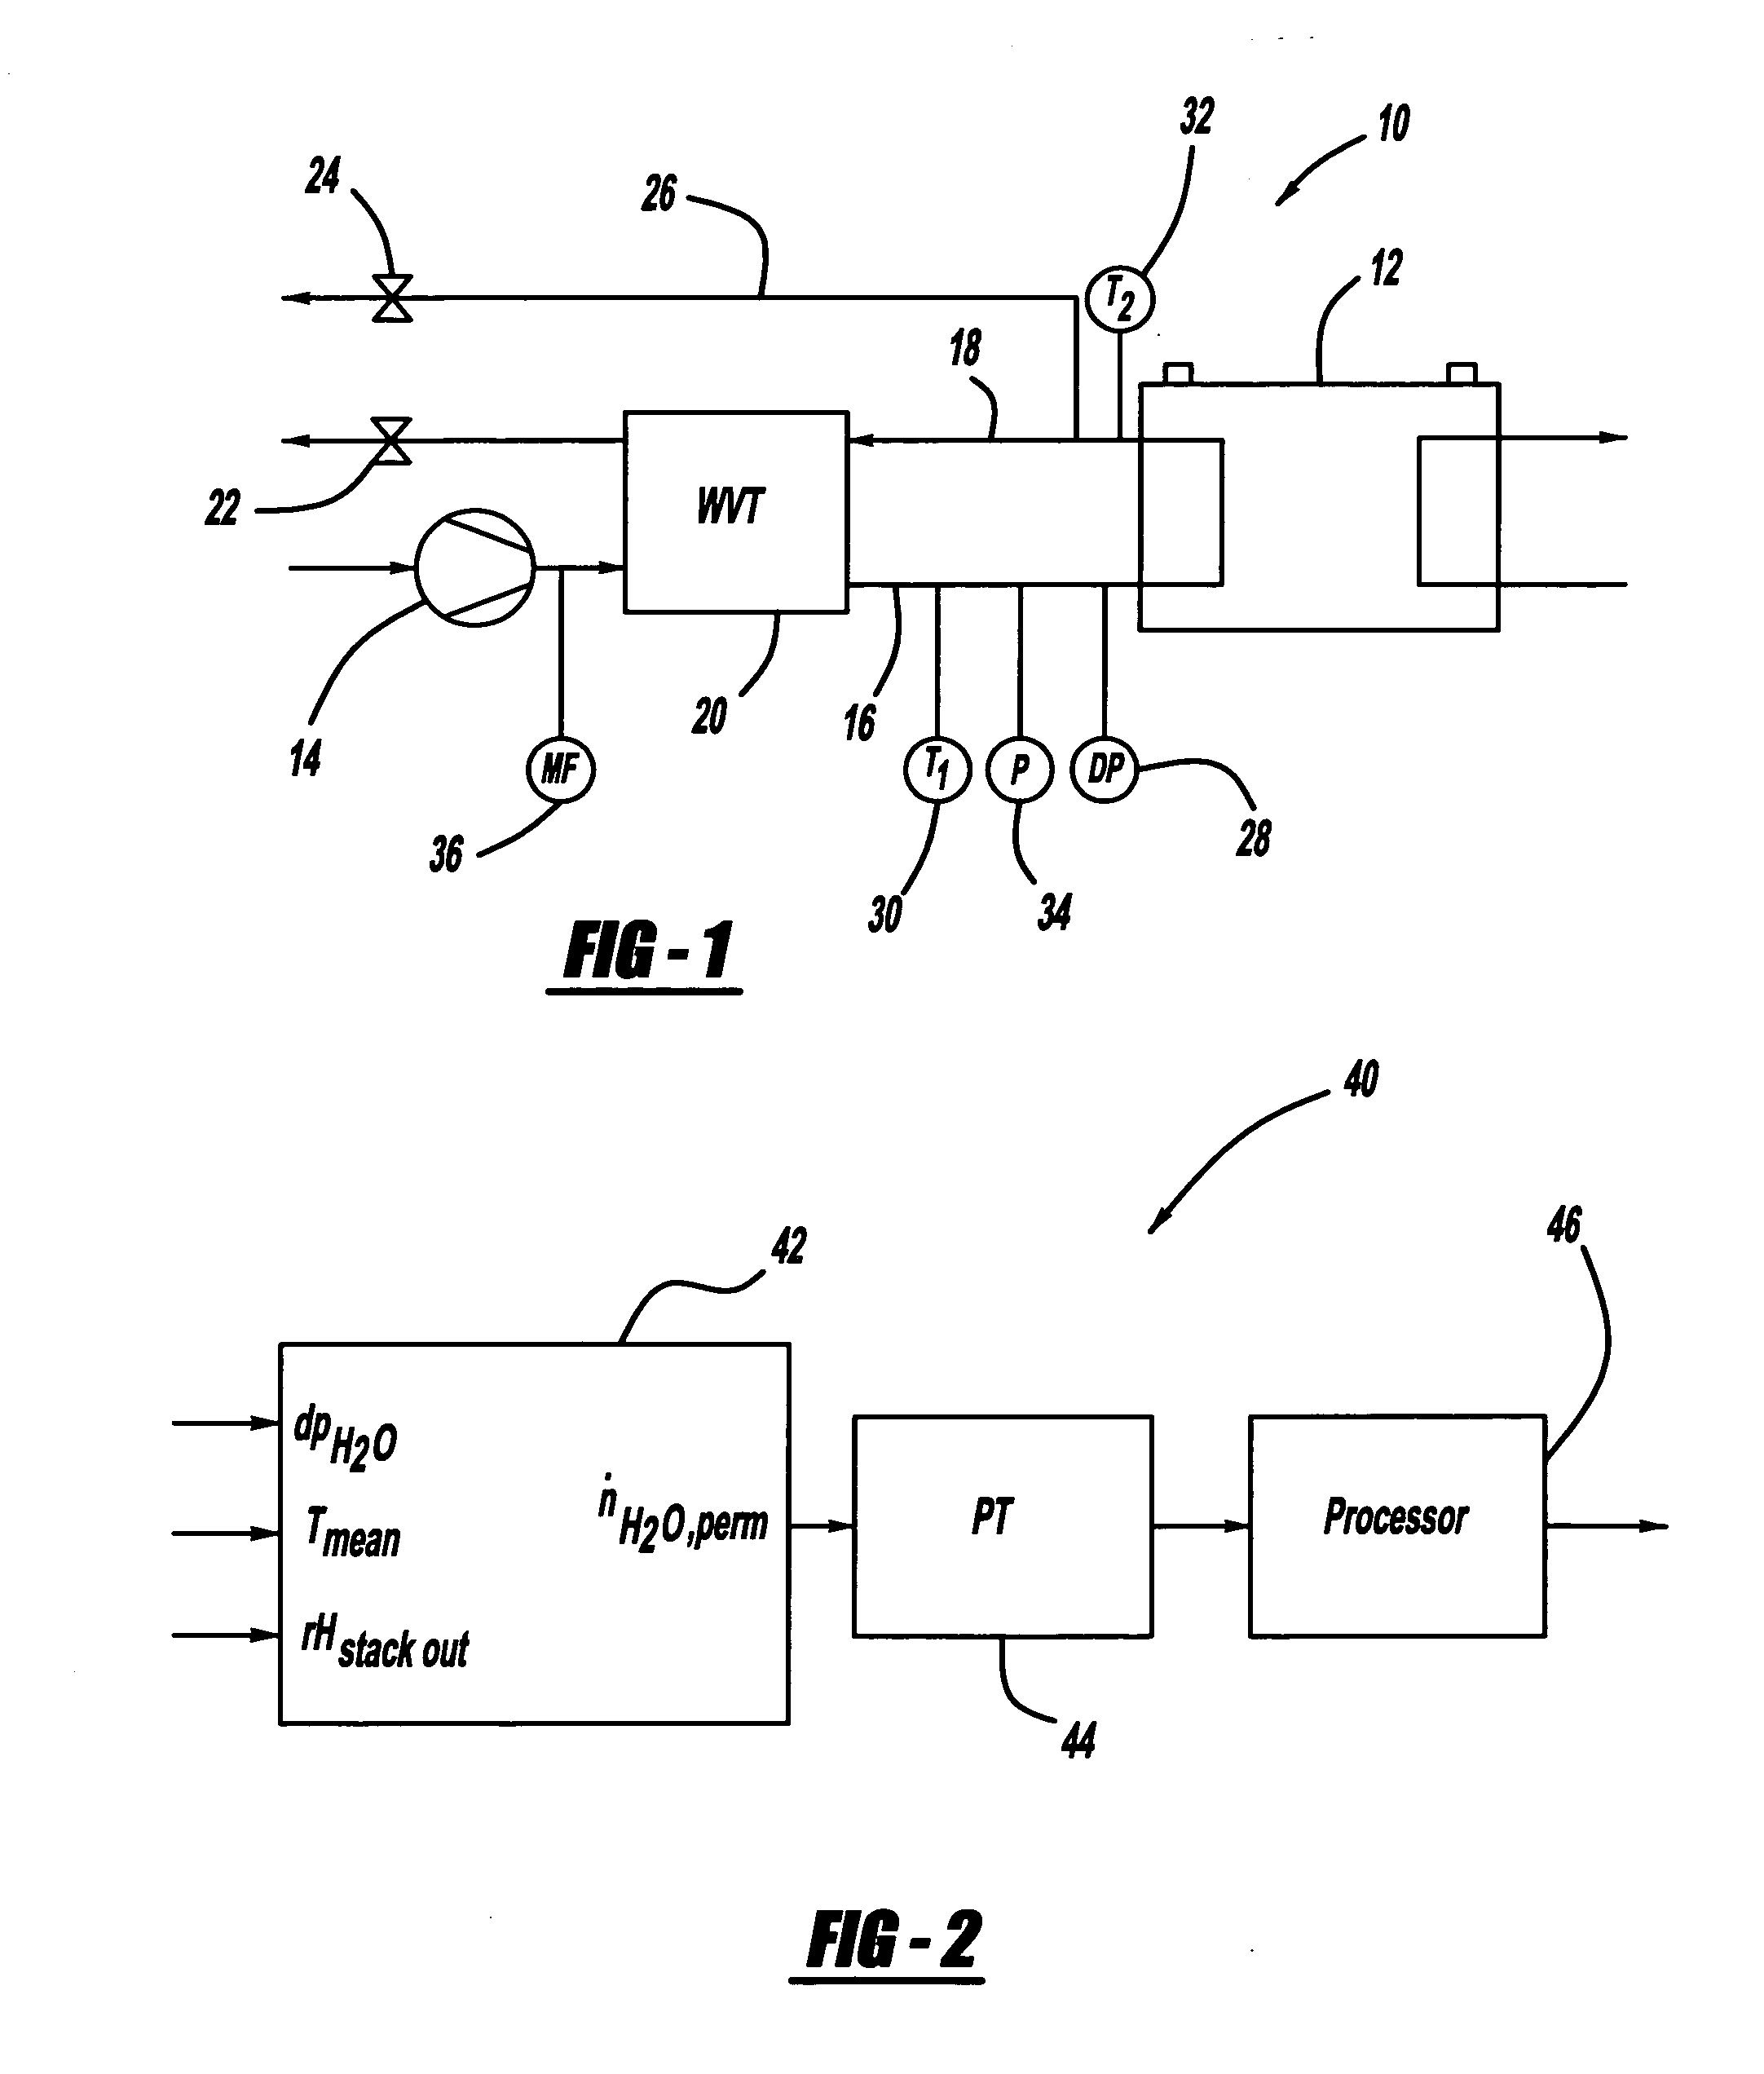 Sensorless relative humidity control in a fuel cell application